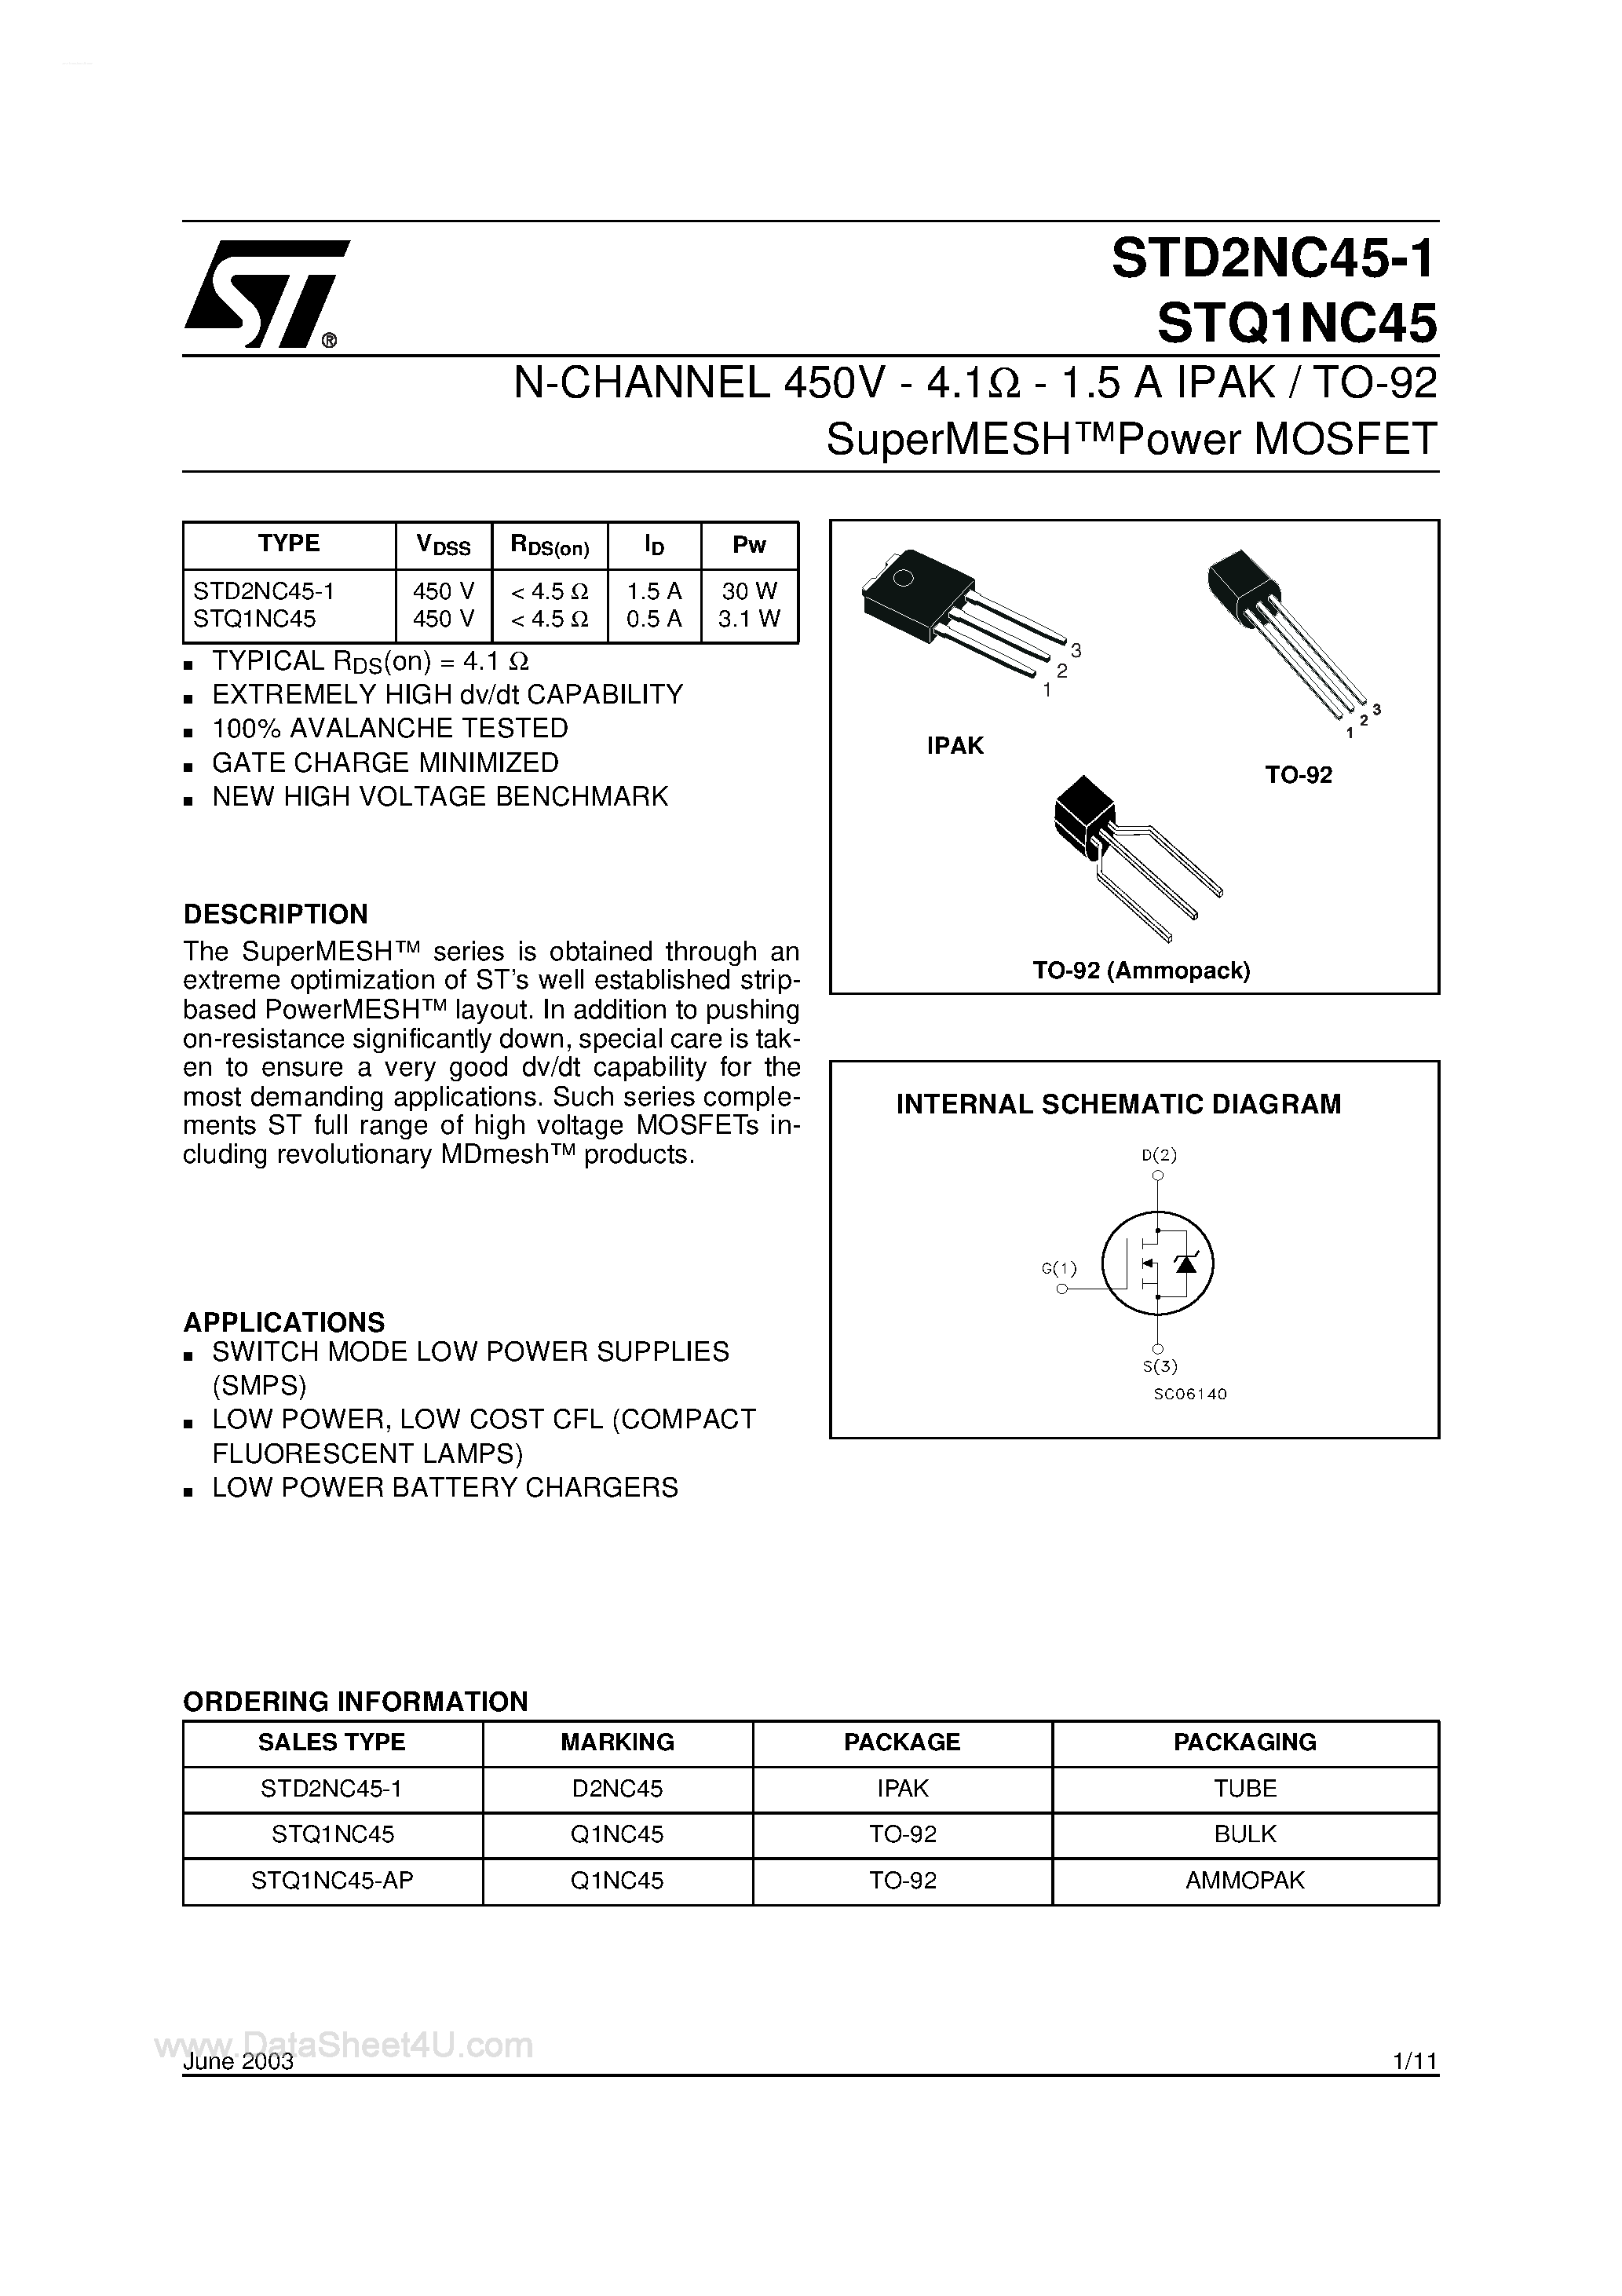 Datasheet STQ1NC45 - N-CHANNEL MOSFET page 1